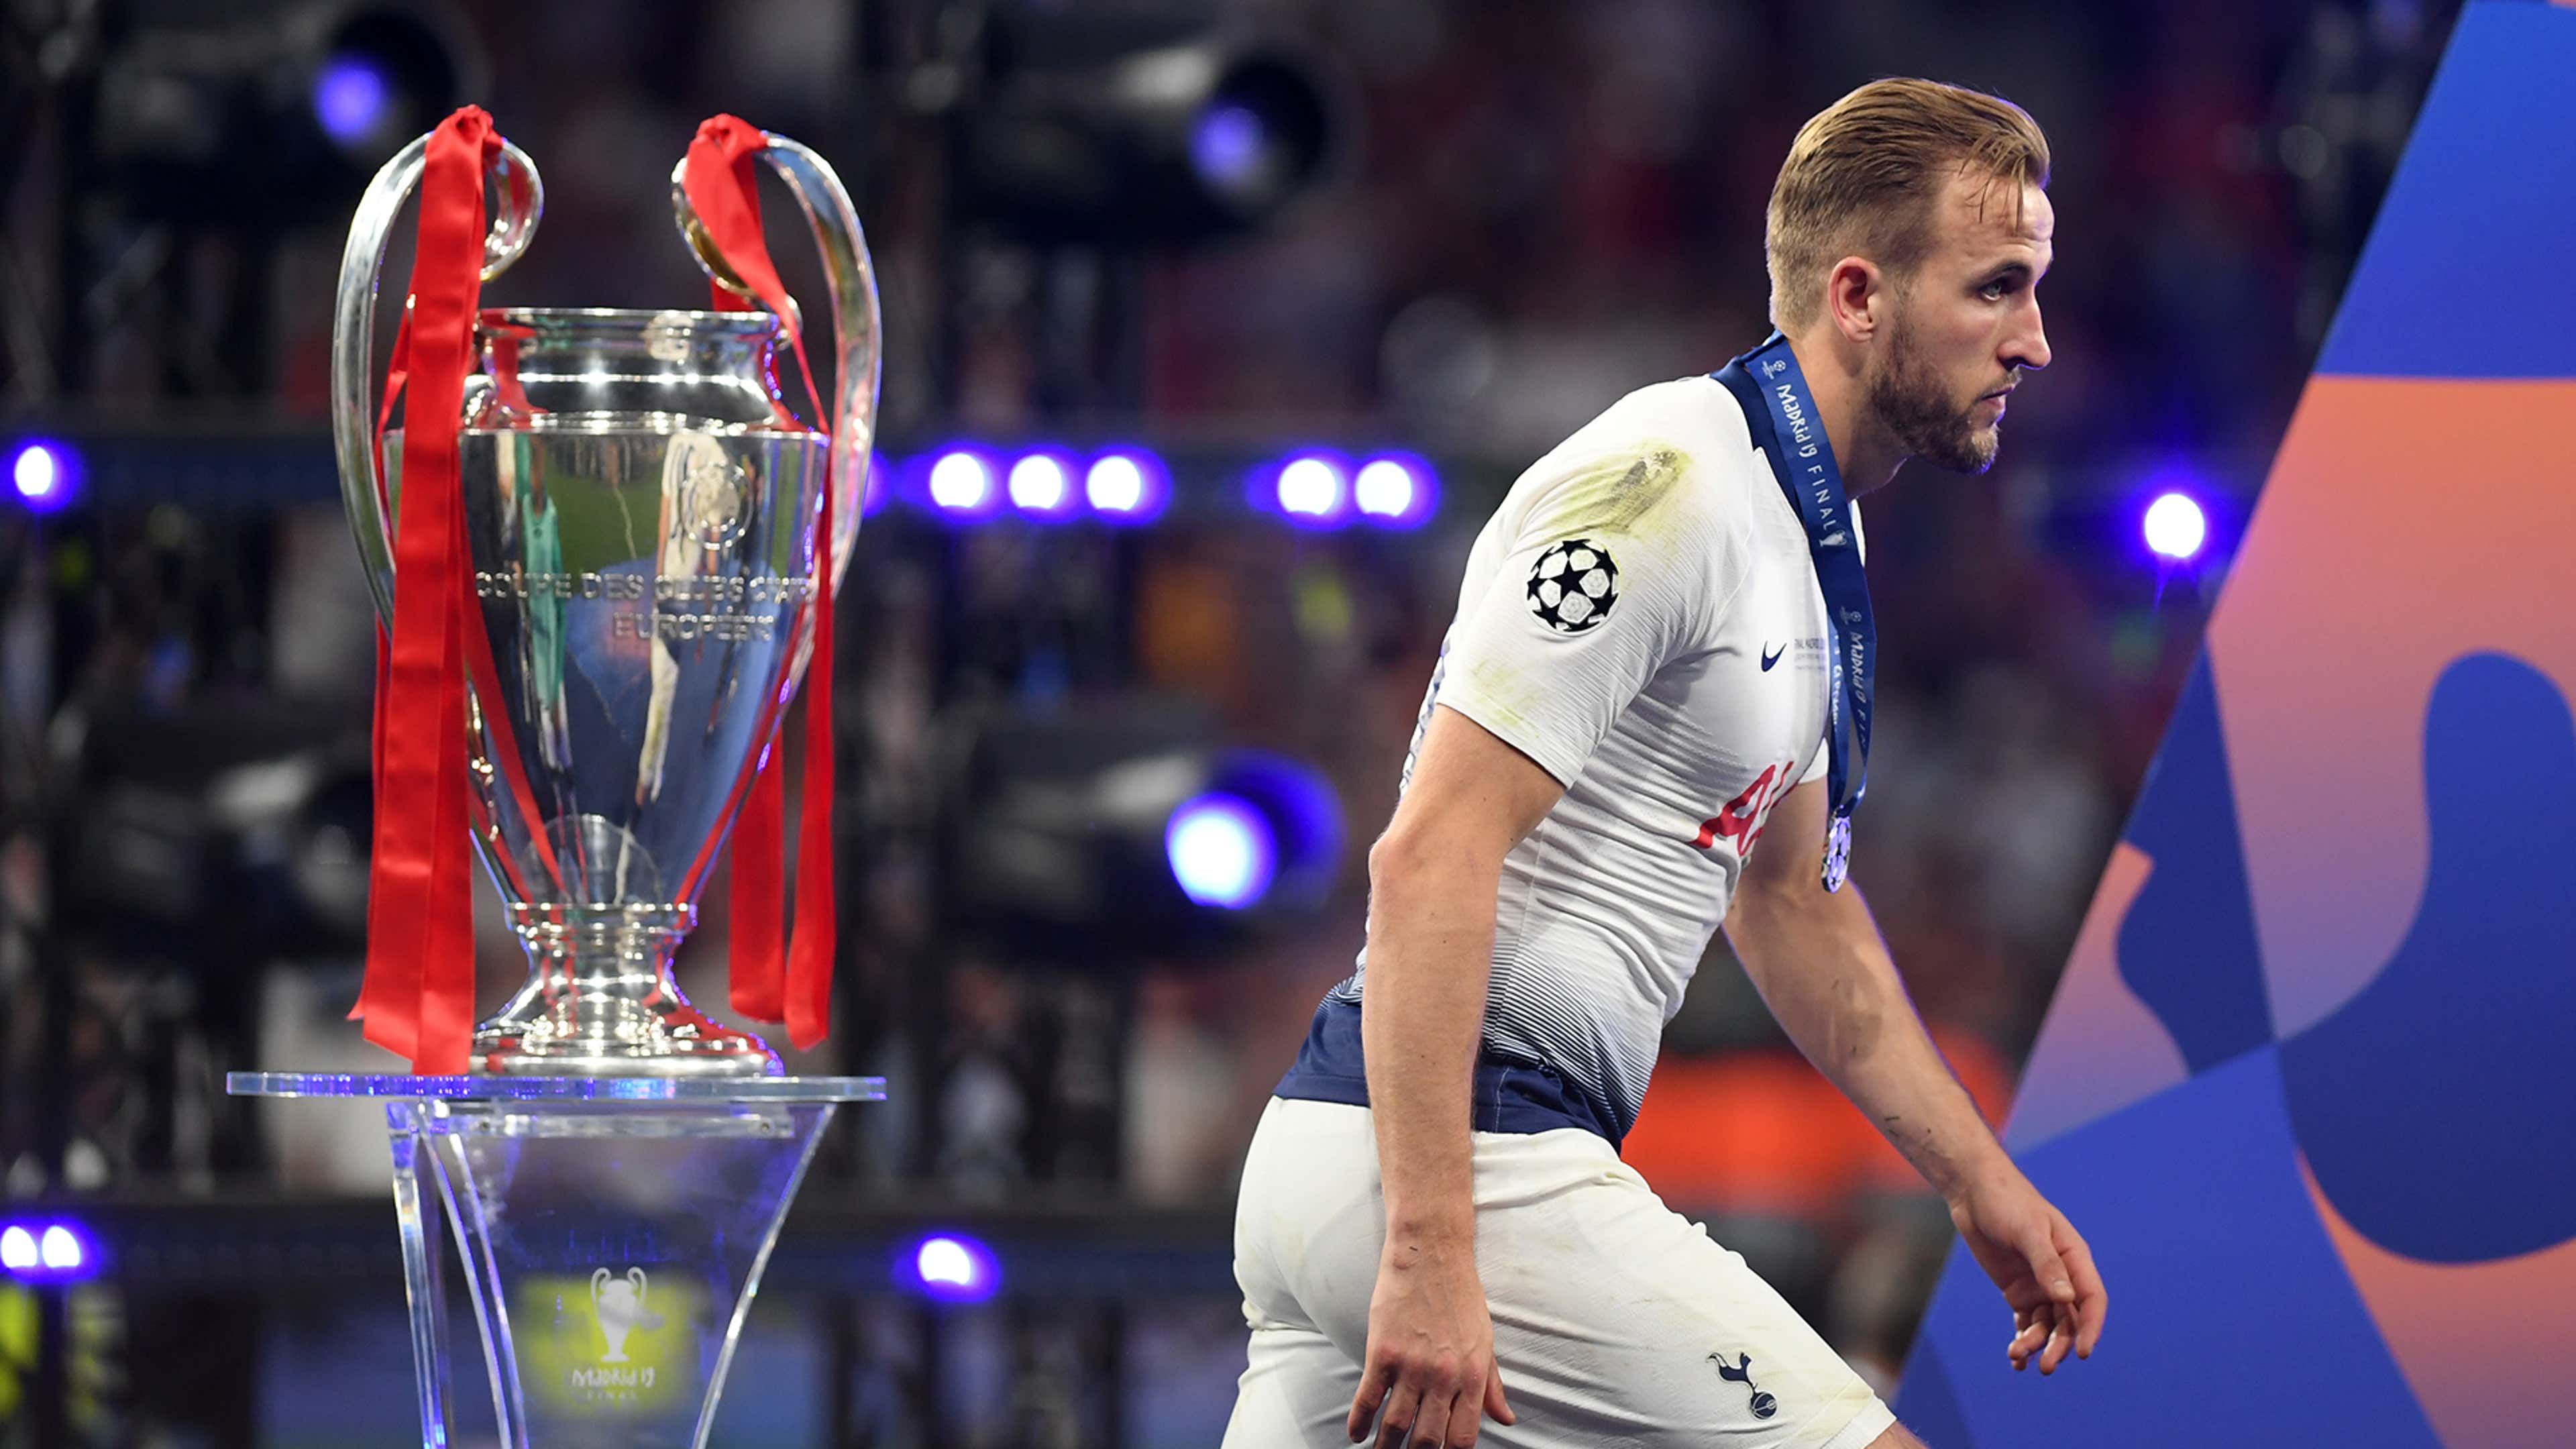 Can Tottenham Hotspur Really Win The Premier League Title?